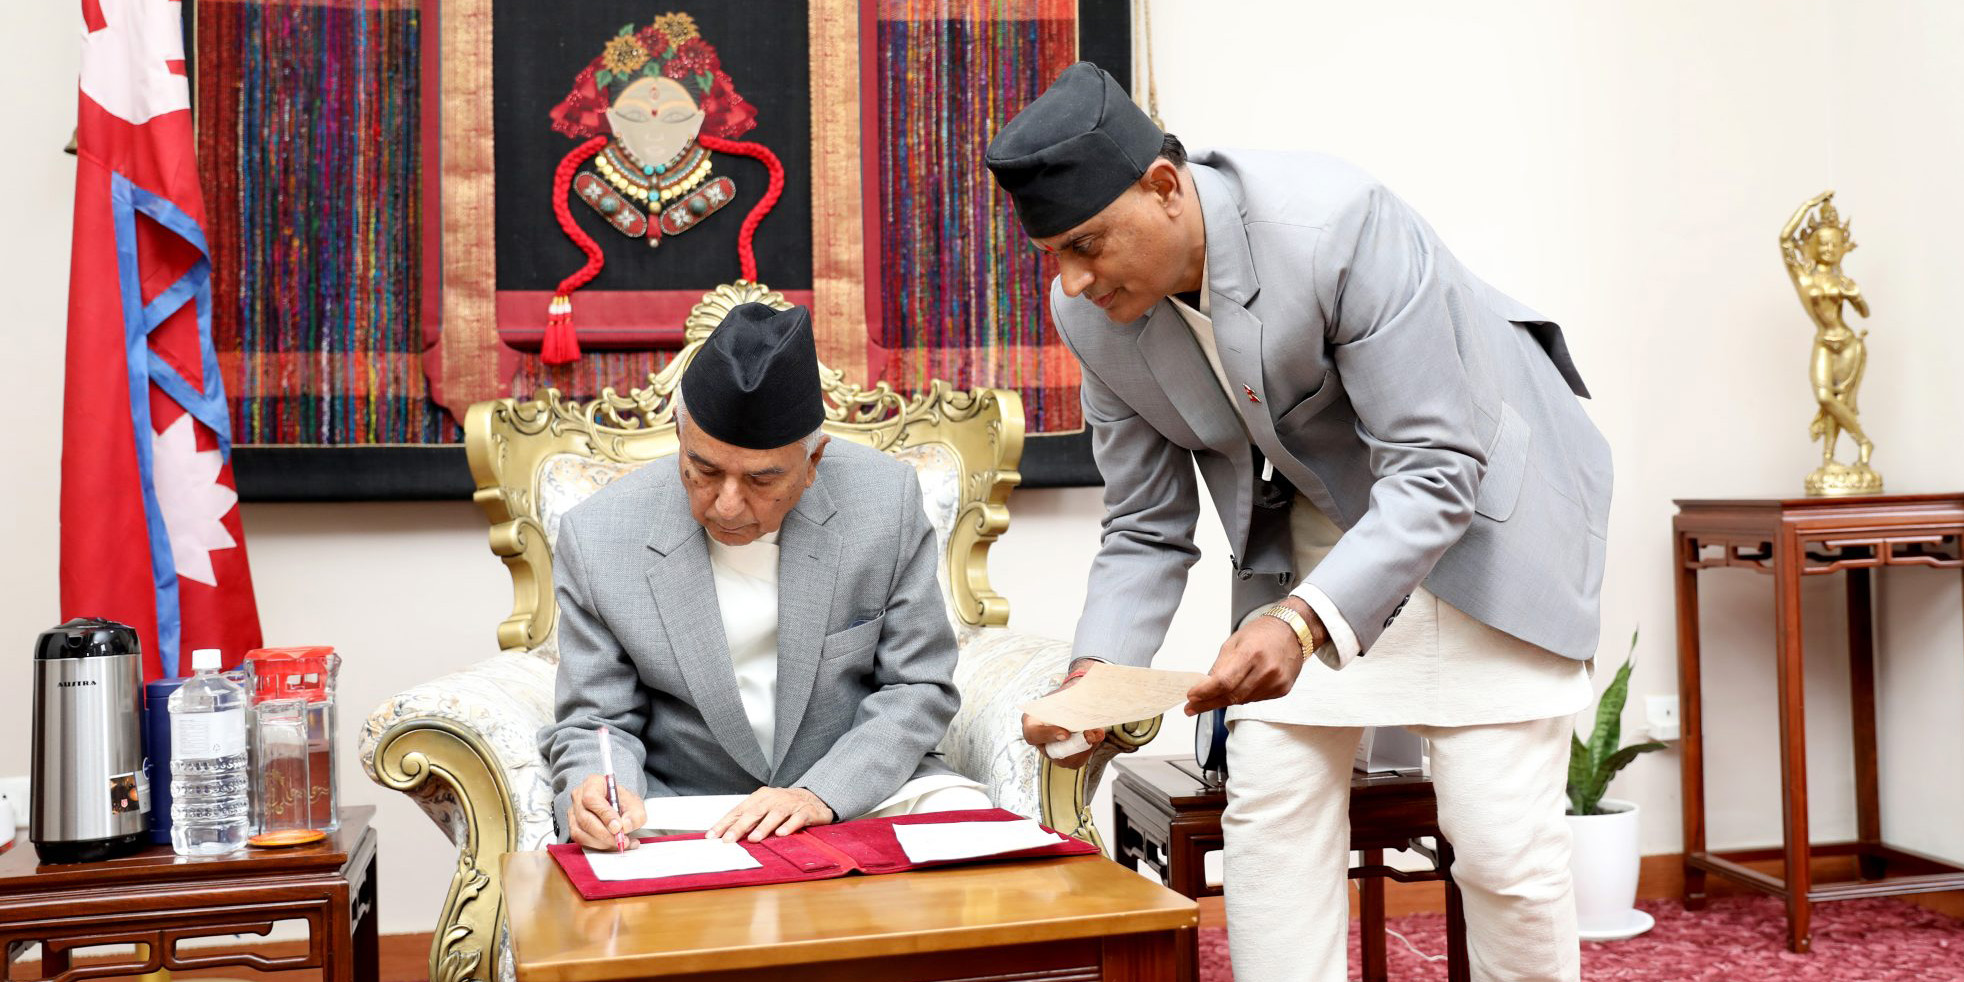 President Poudel authenticates citizenship bill rejected by his predecessor